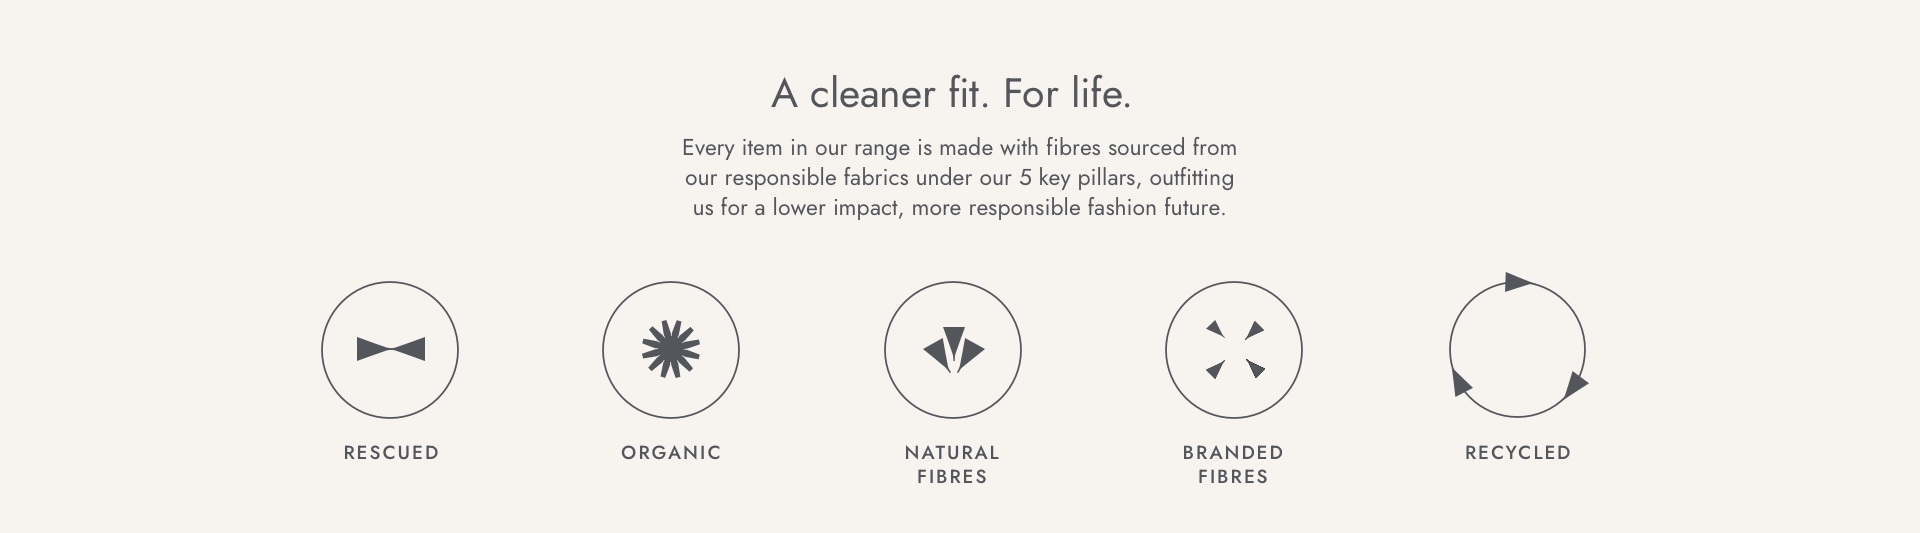 A cleaner fit. For life.